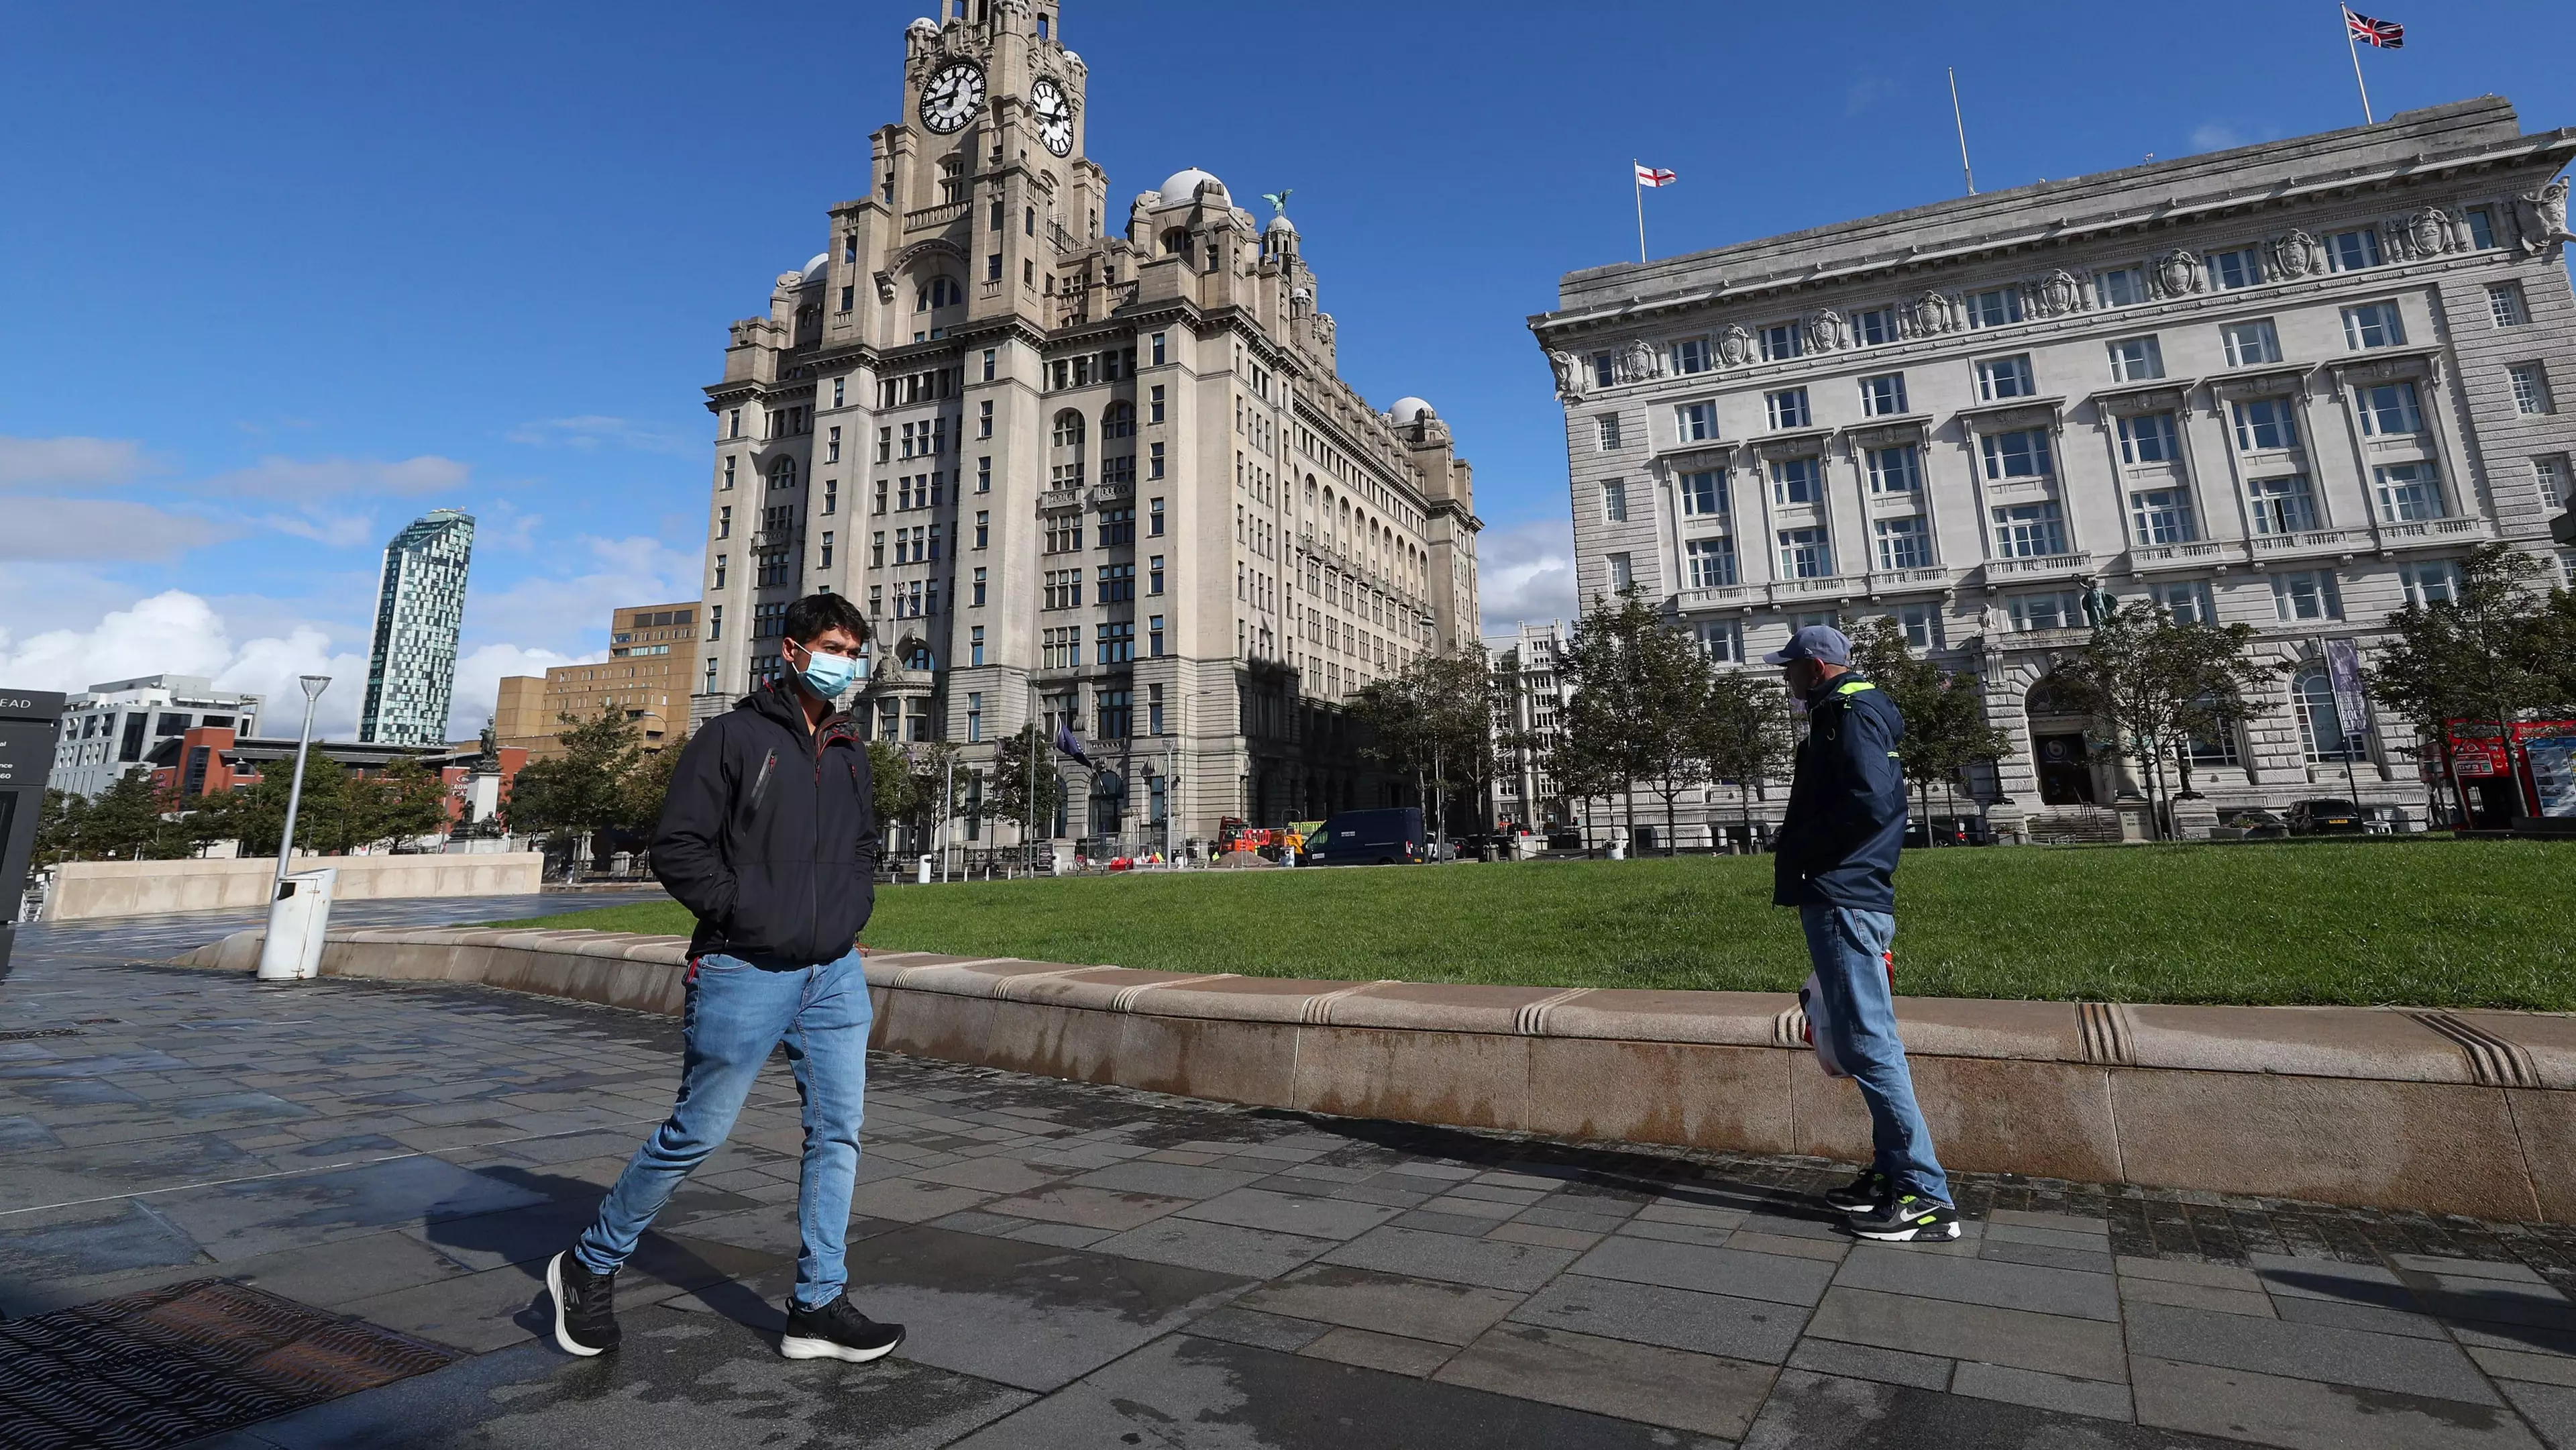 Liverpool Residents To Be Regularly Tested For Coronavirus In First Whole City Testing